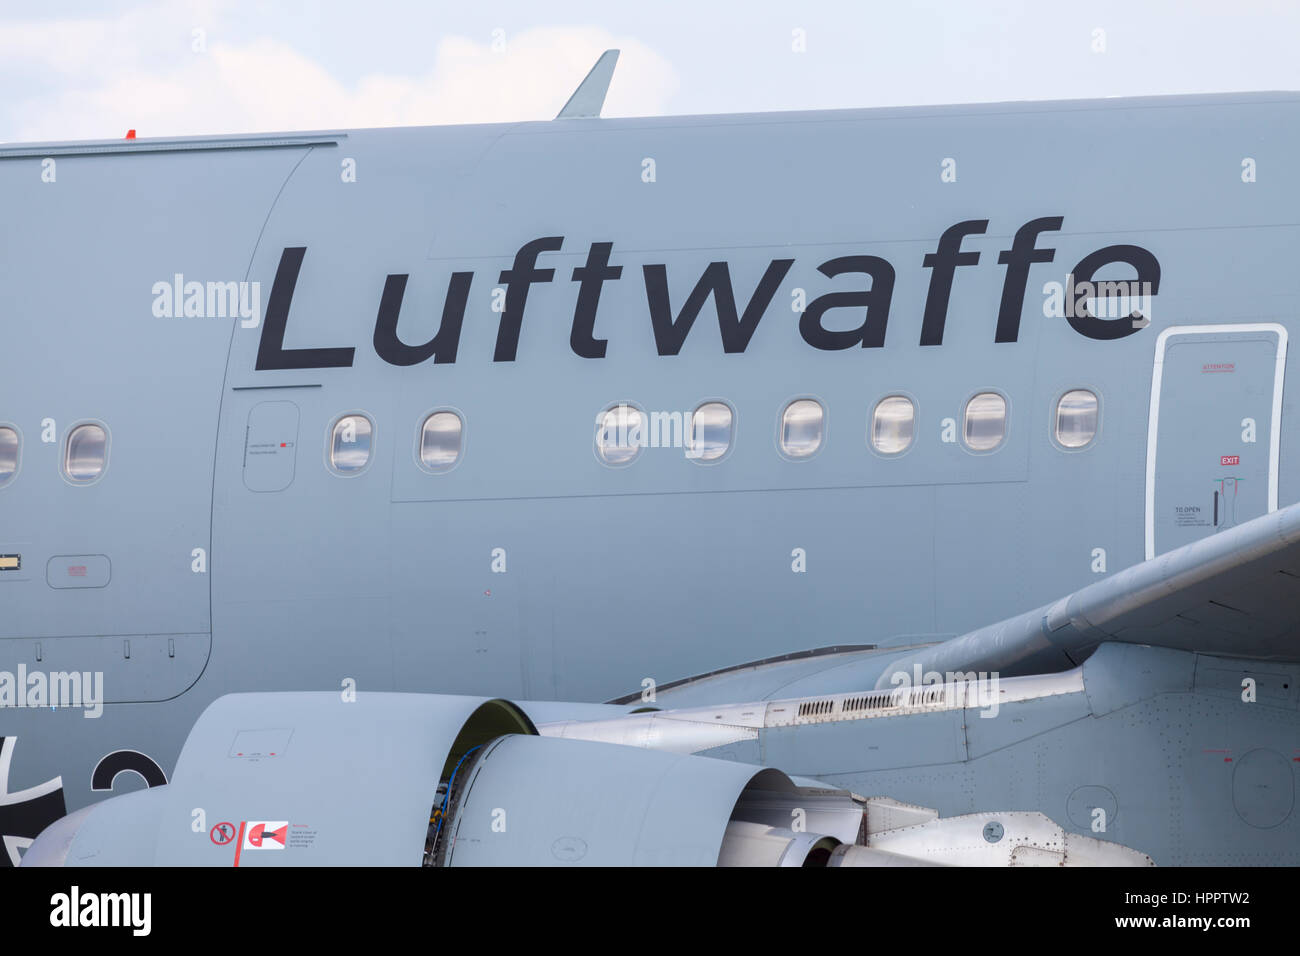 BERLIN / GERMANY - JUNE 3, 2016: Luftwaffe ( german Airforce ) logo on an aircraft from german airforce Stock Photo